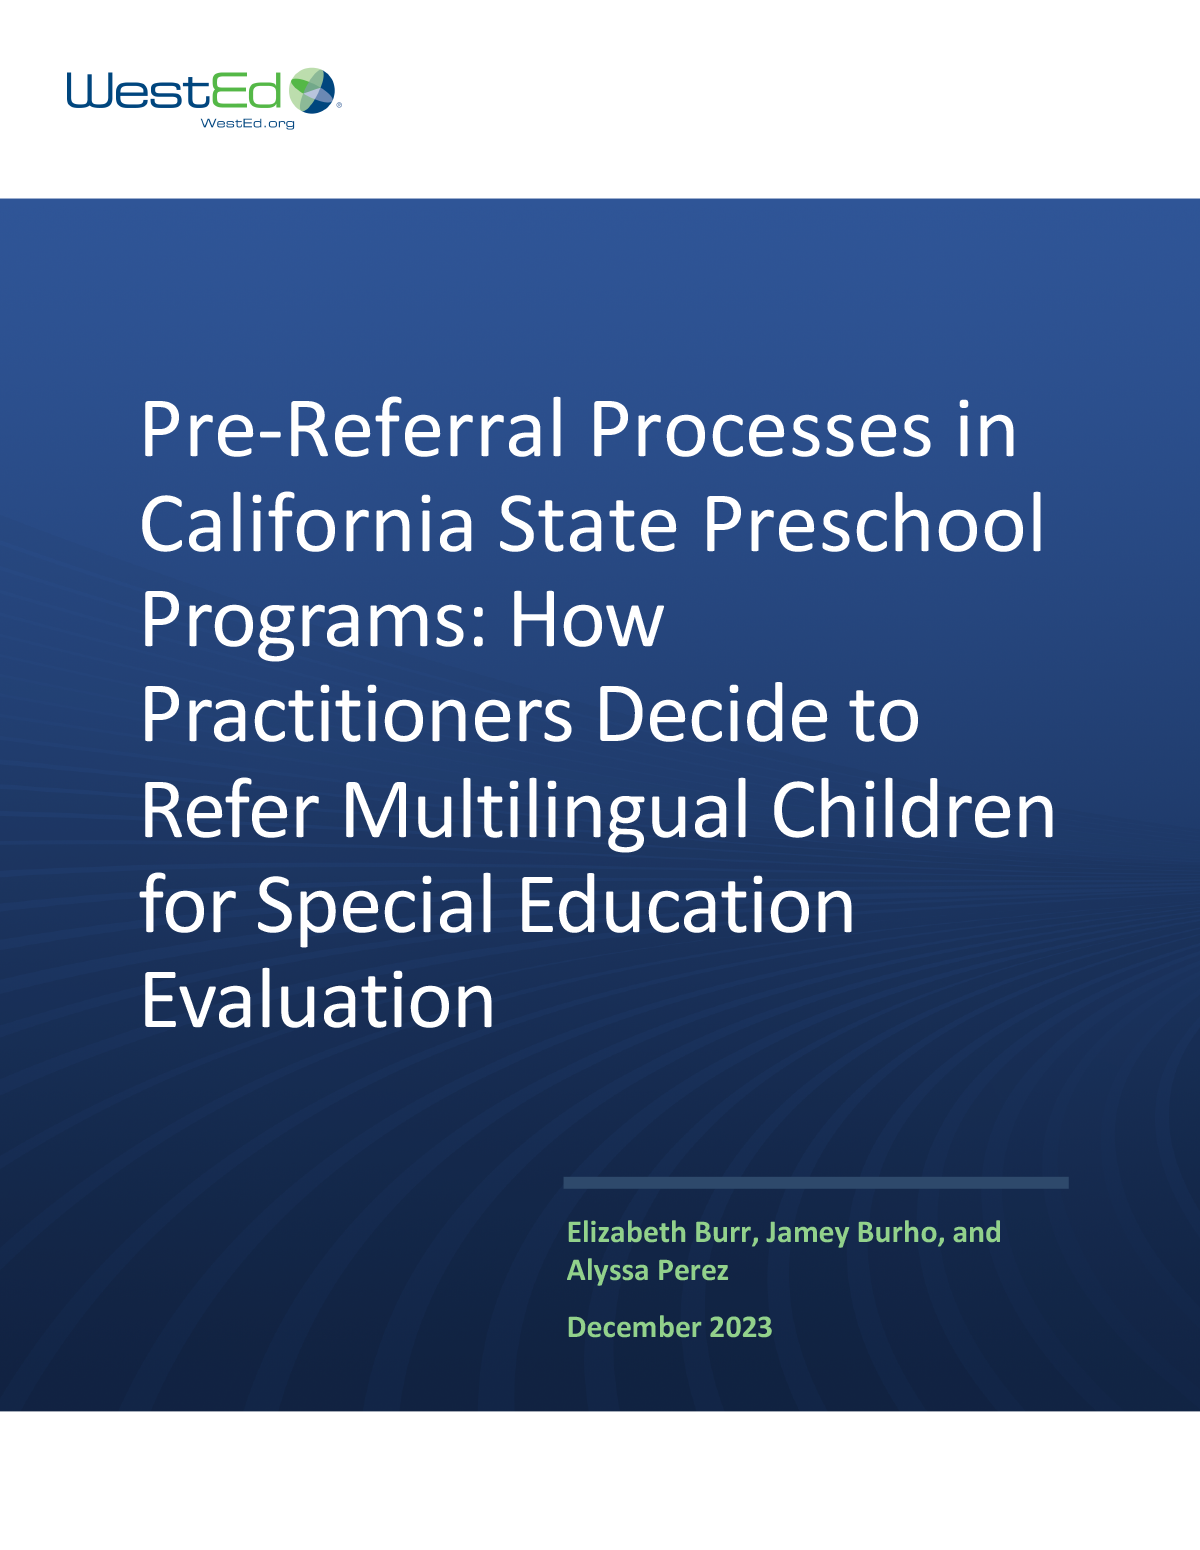 Pre-Referral Processes in California State Preschool Programs: How Practitioners Decide to Refer Multilingual Children for Special Education Evaluation